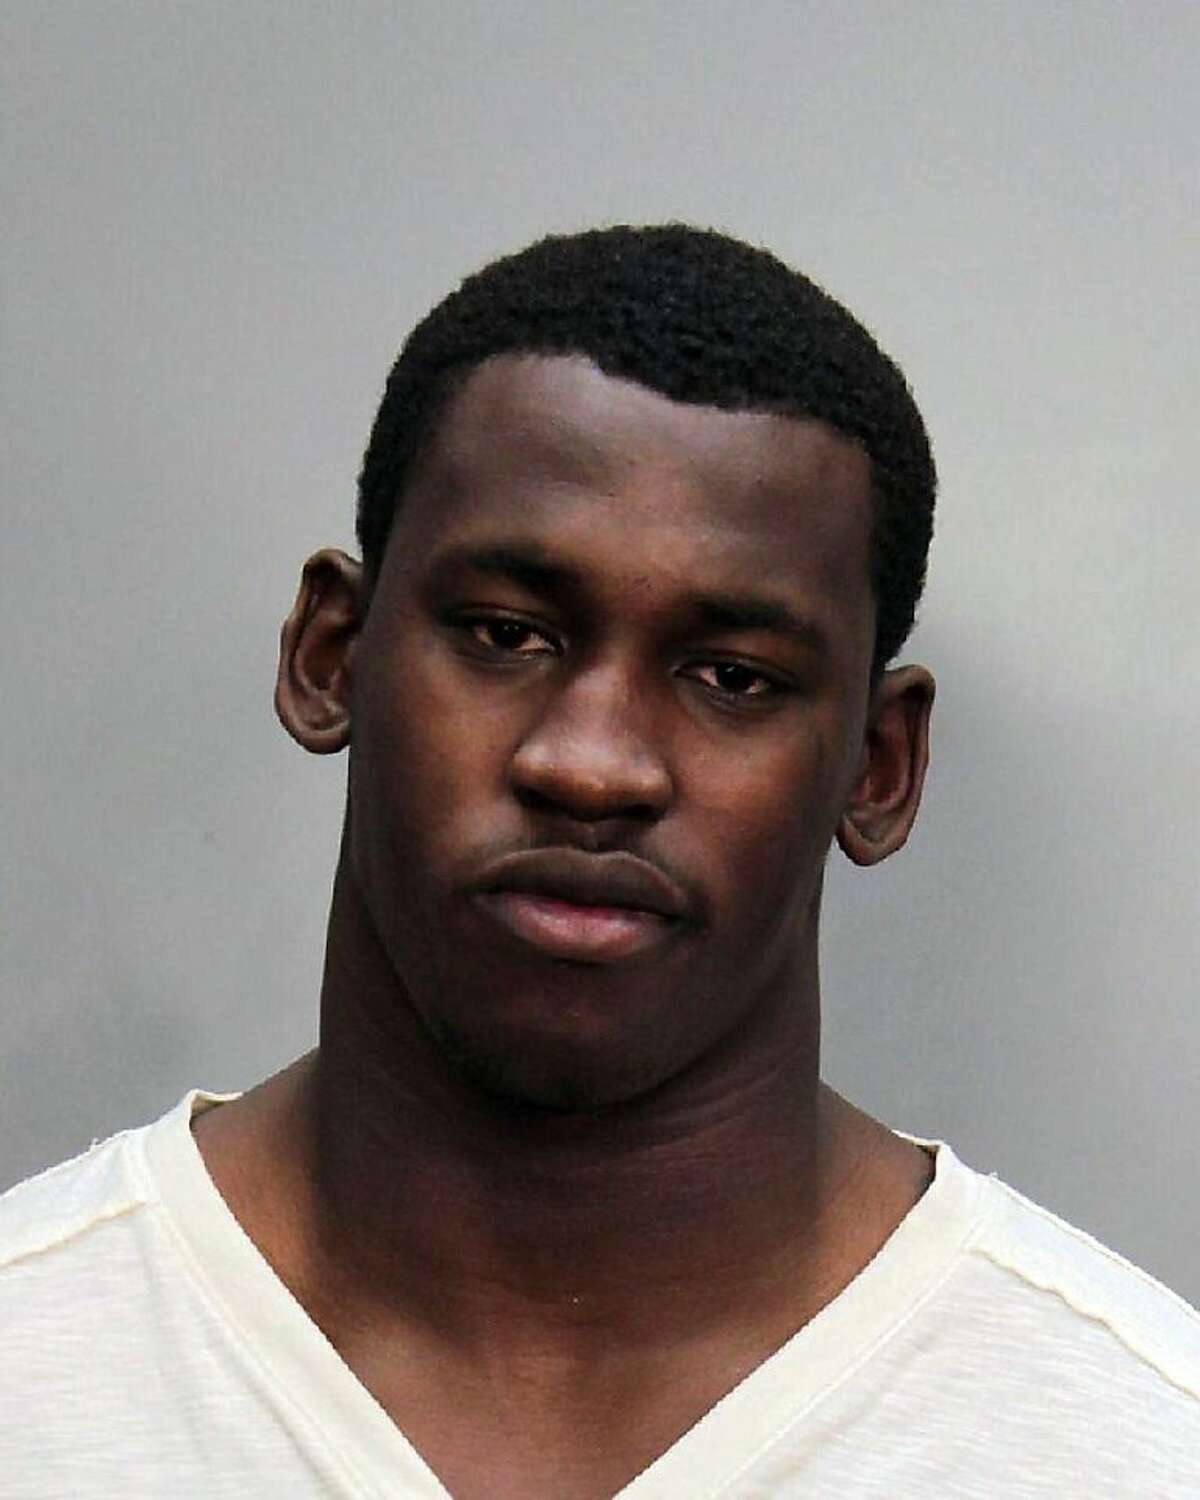 This photo provided by the Miami-Dade County Jail shows Aldon Smith. San Francisco 49ers linebacker Aldon Smith has been charged with driving under the influence, Saturday, Jan. 28, 2012 in Miami Beach, Fla. (AP Photo/Miami-Dade County Jail)